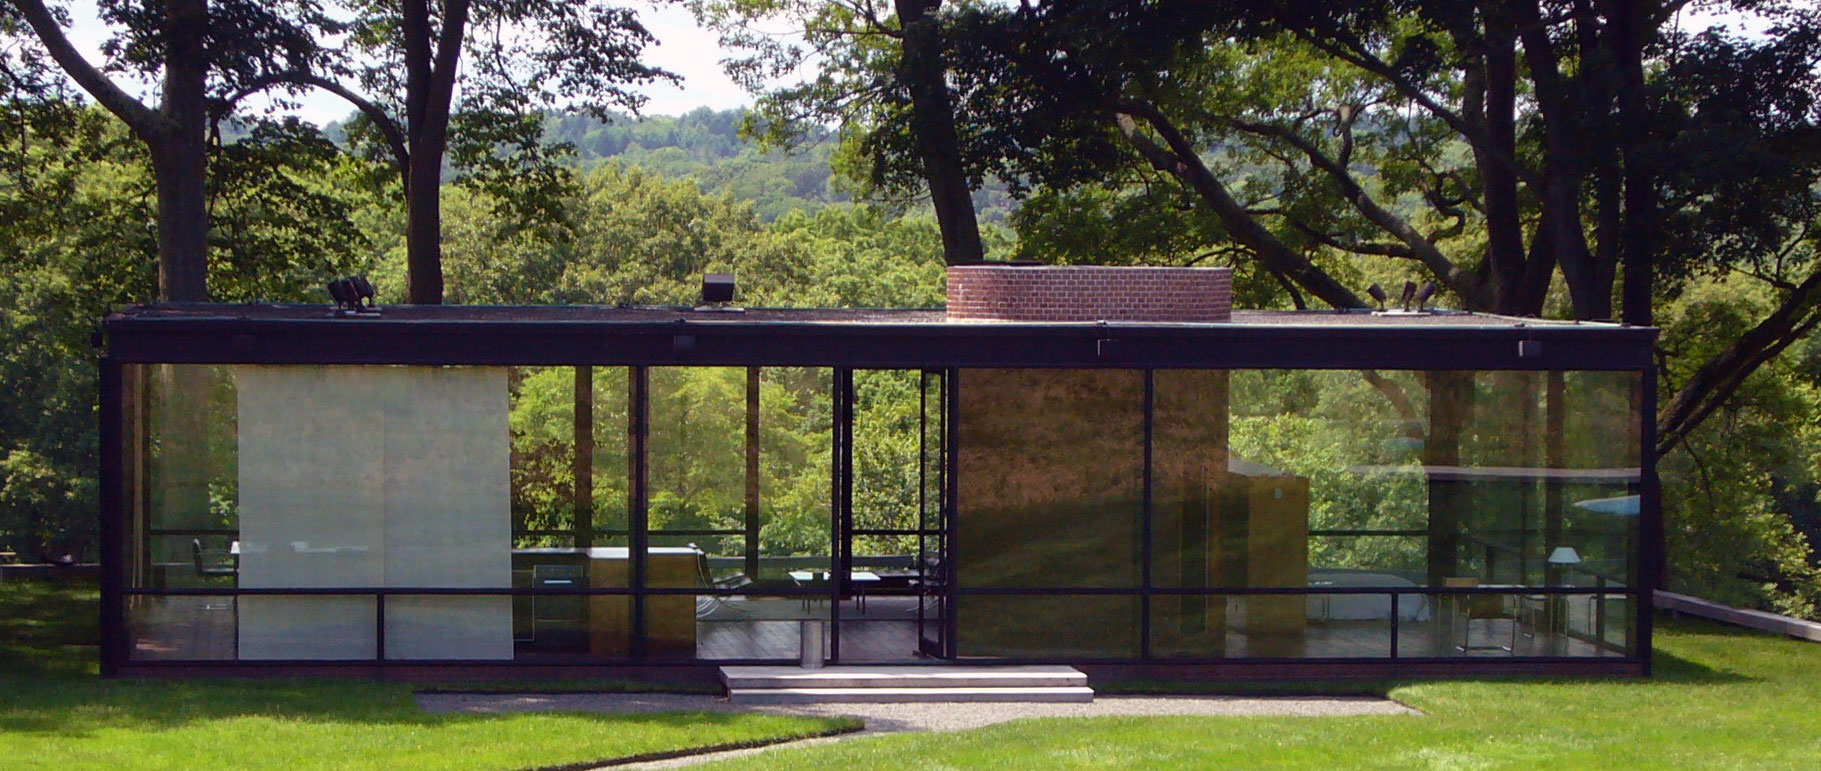 The Glass House by Philip Johnson. Photograph by Staib, courtesy of Wikimedia Commons